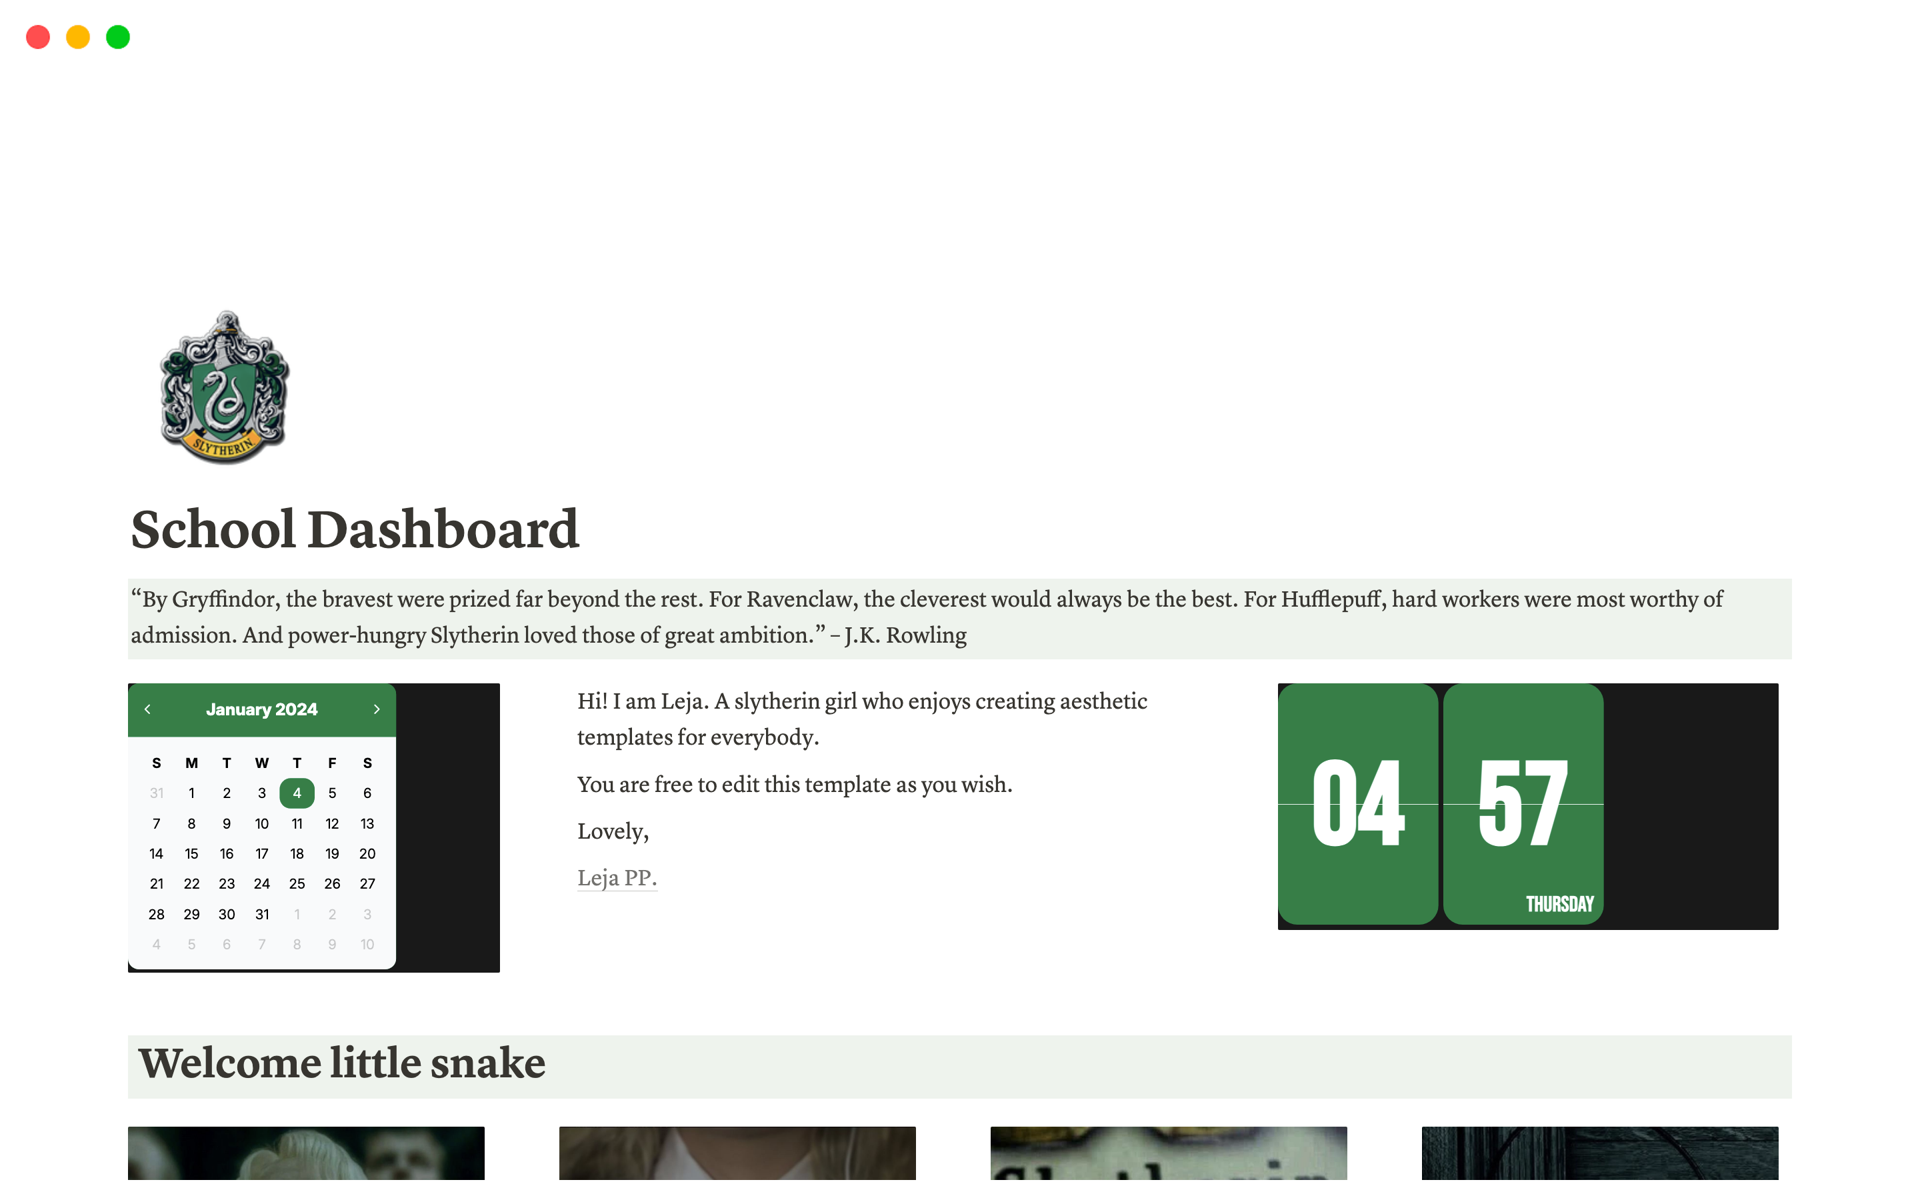 A school dashboard for slytherins.